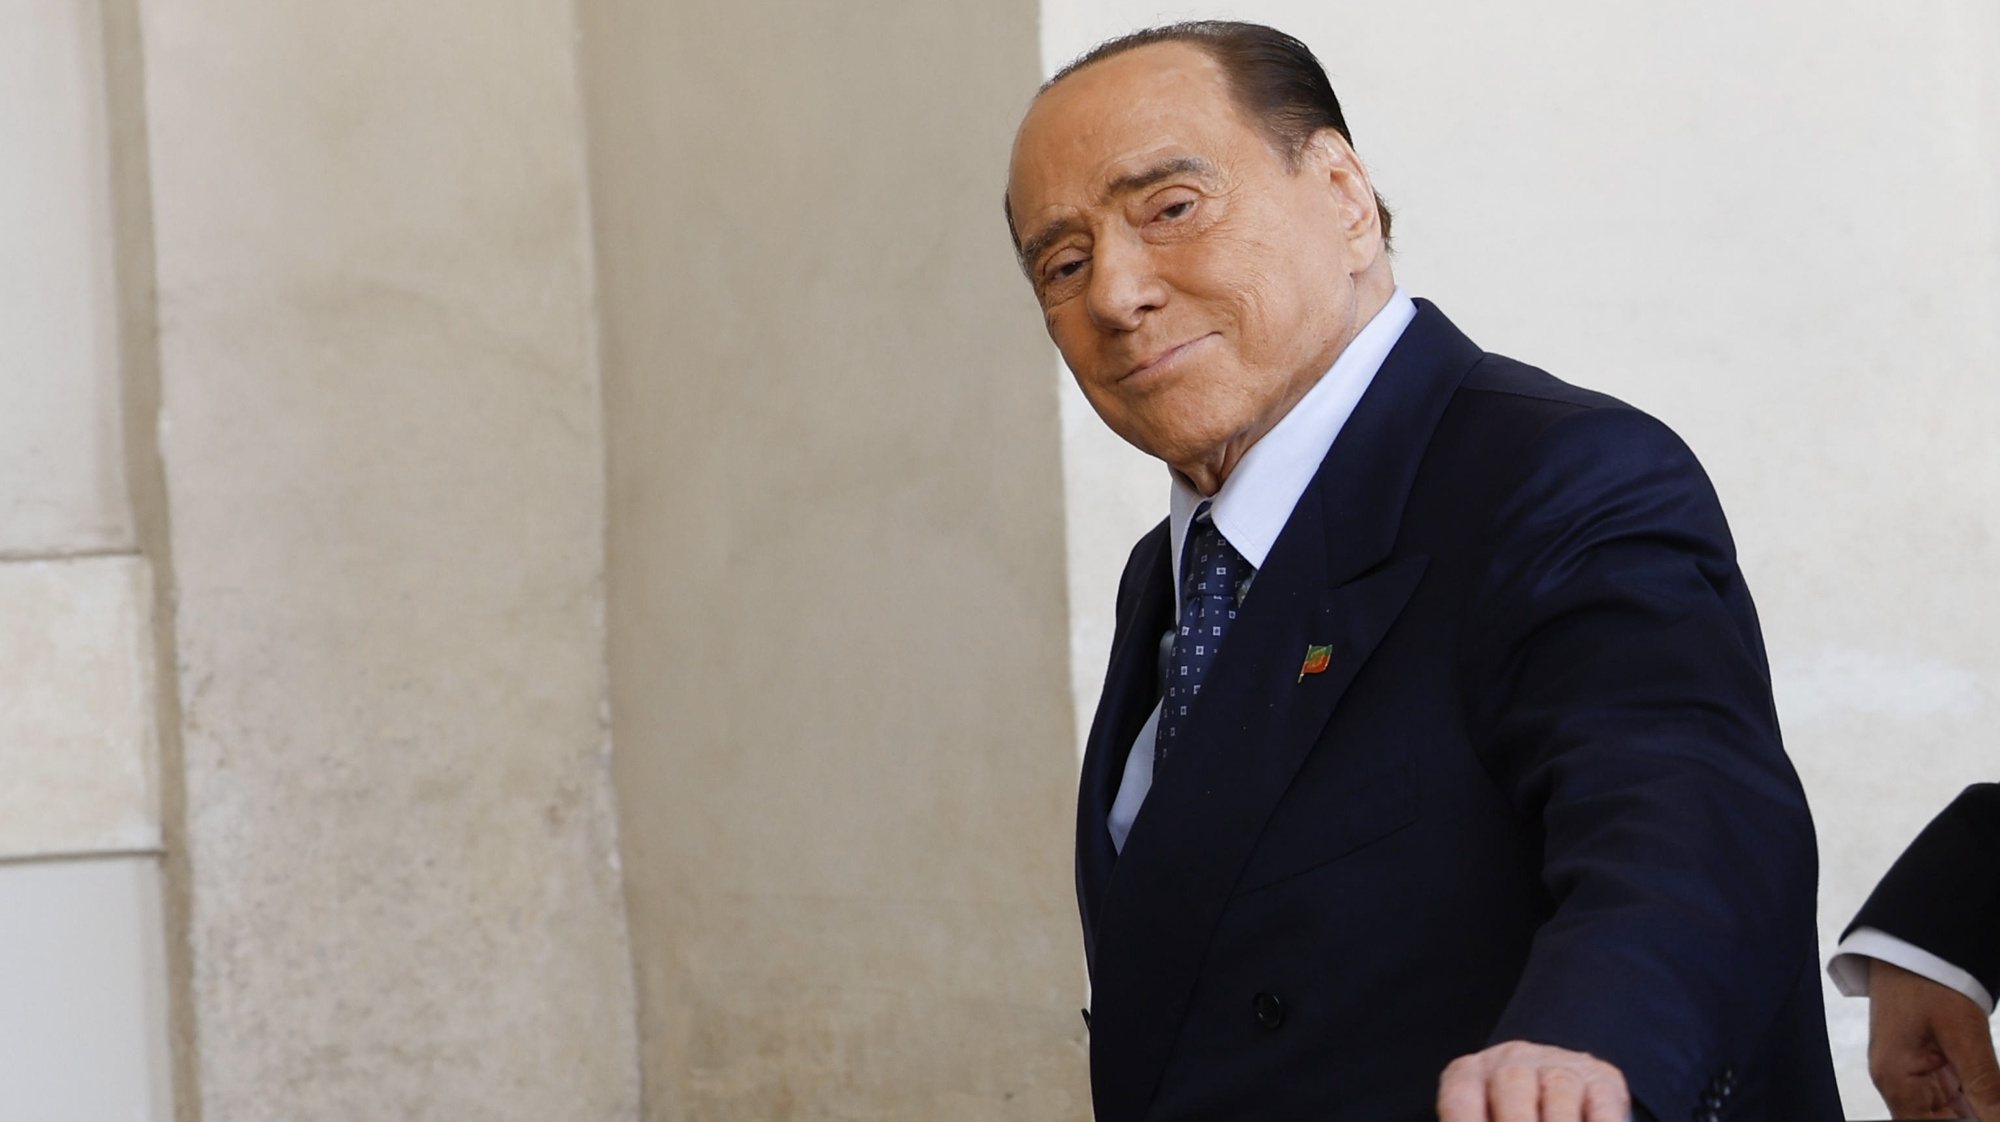 epa10256329 Leader of &#039;Forza Italia&#039; party Silvio Berlusconi arrives for a meeting with Italian president for the first round of formal political consultations for new government at the Quirinale Palace in Rome, Italy, 21 October 2022.  EPA/FABIO FRUSTACI